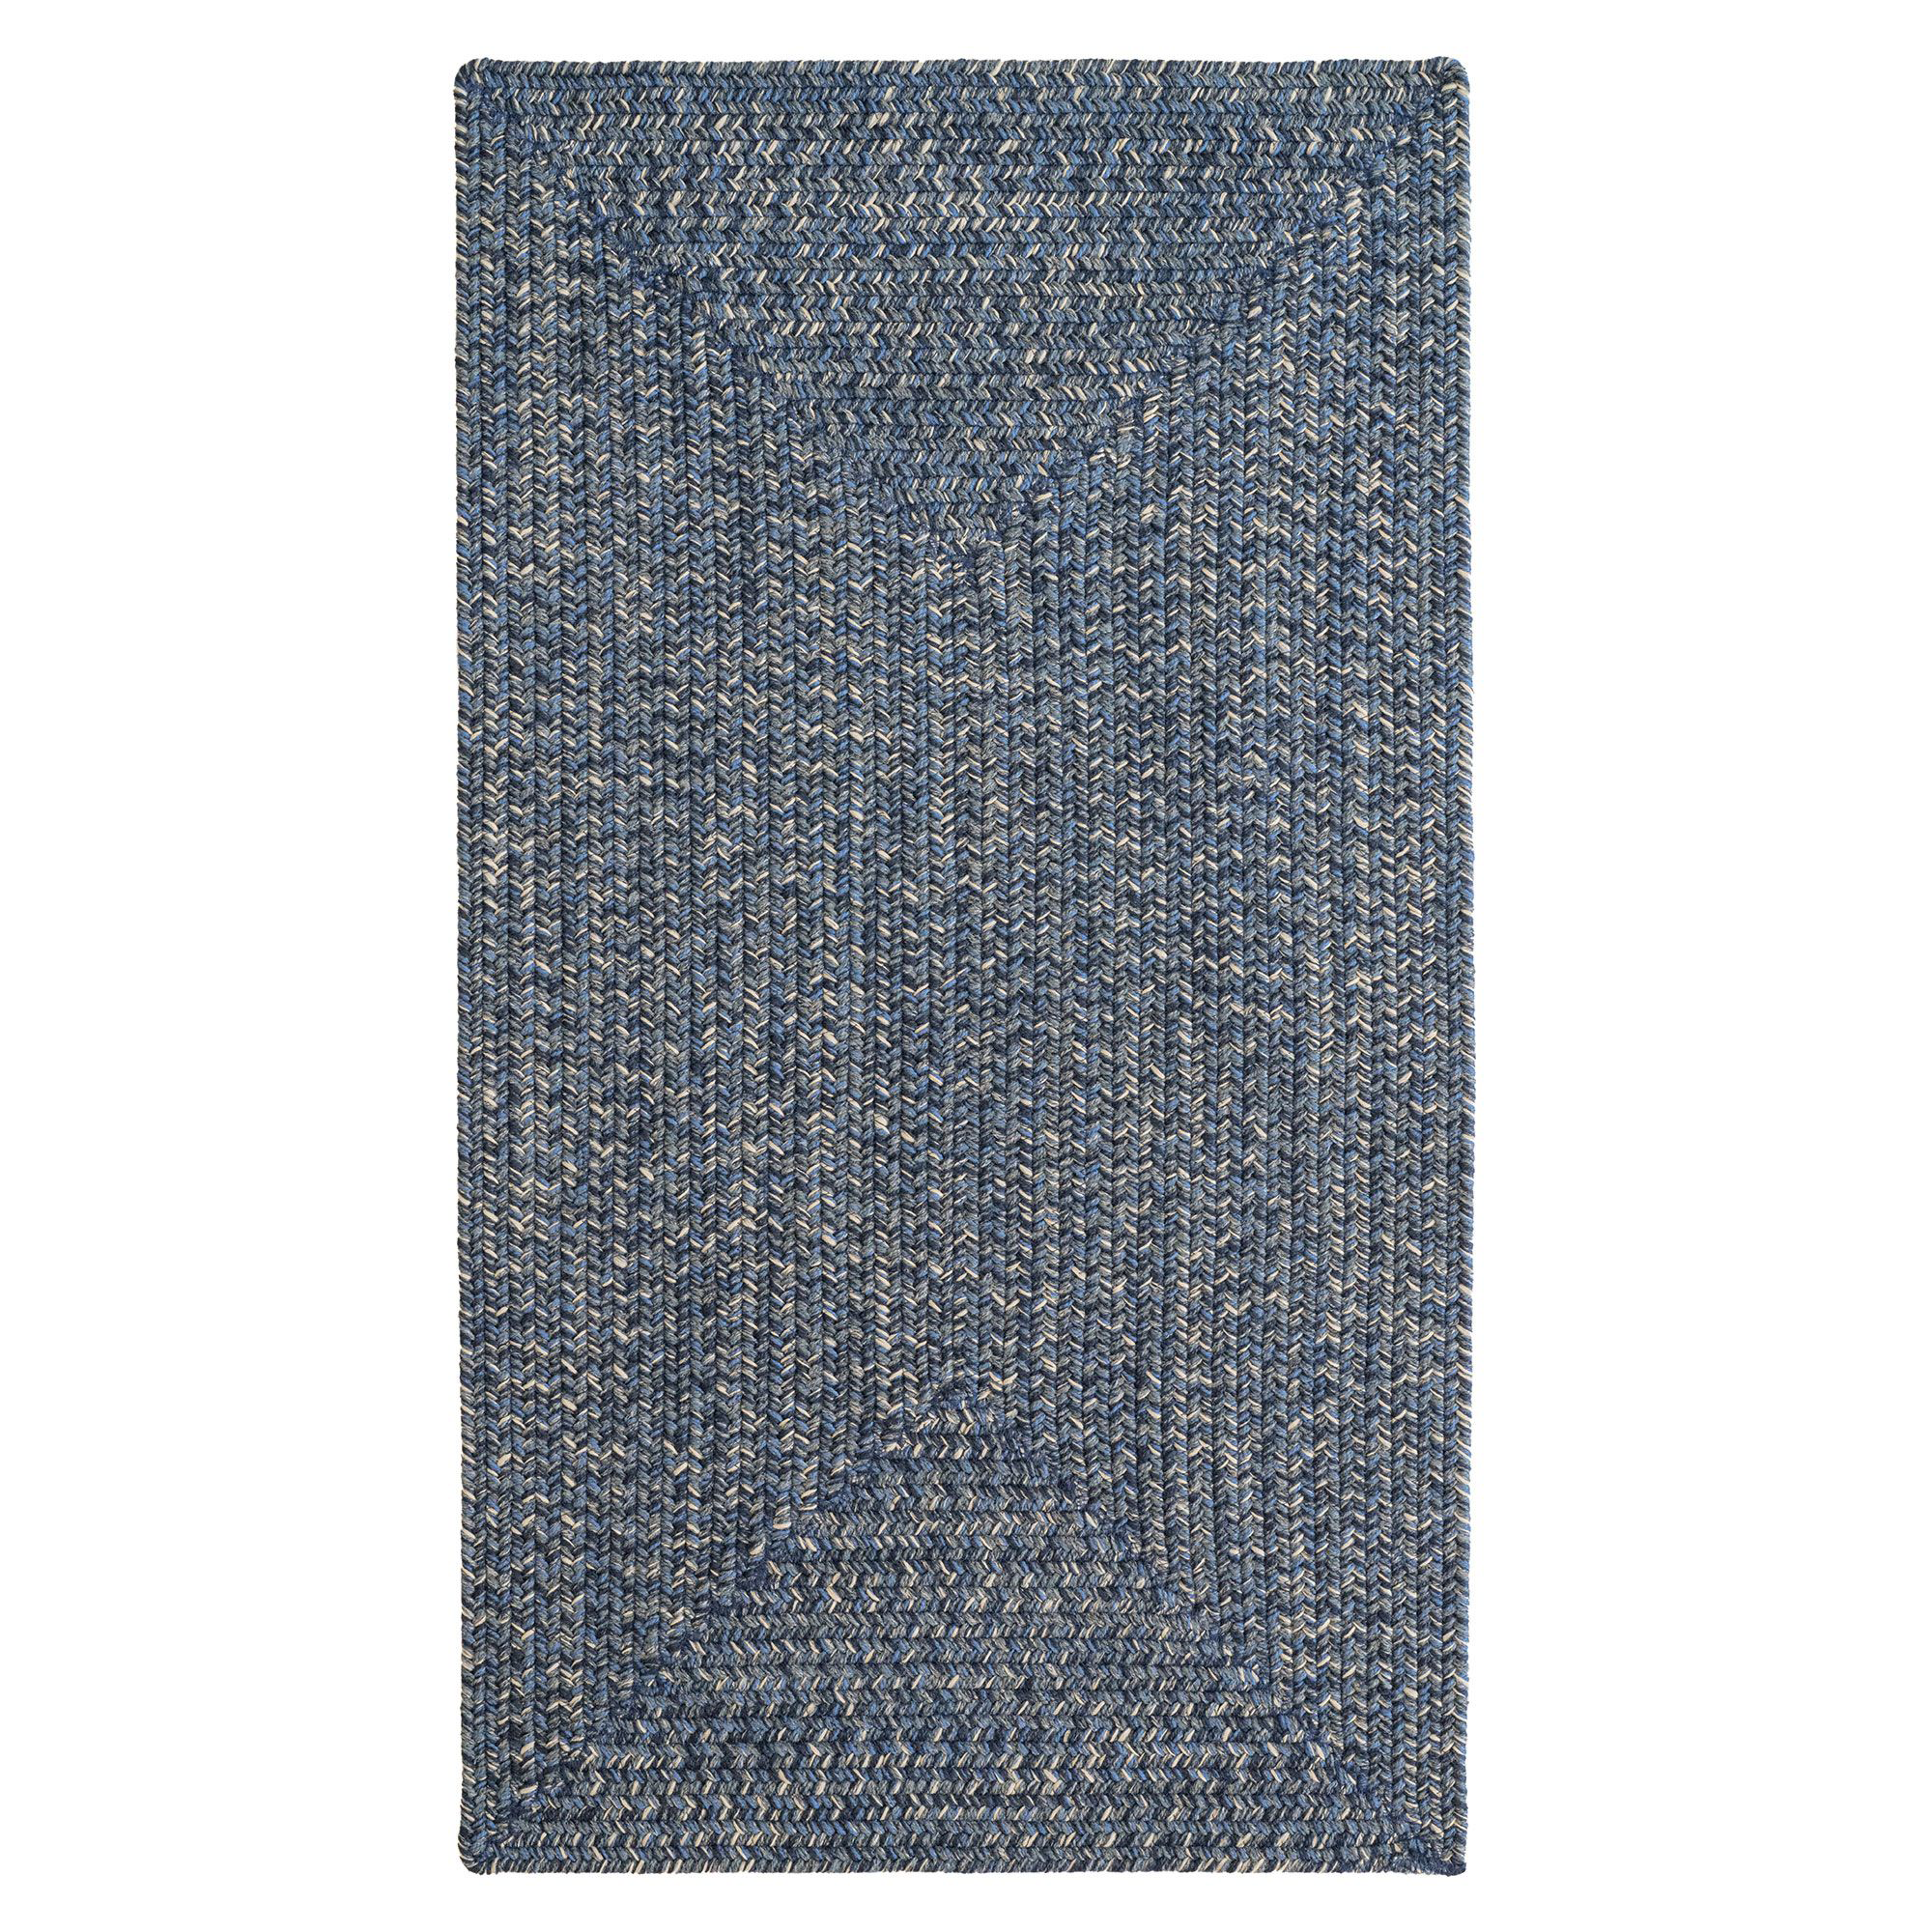 Capel Worcester Indoor/Outdoor Braided Concentric Rectangle Area Rug - Dark Blueprint - 7' x 9